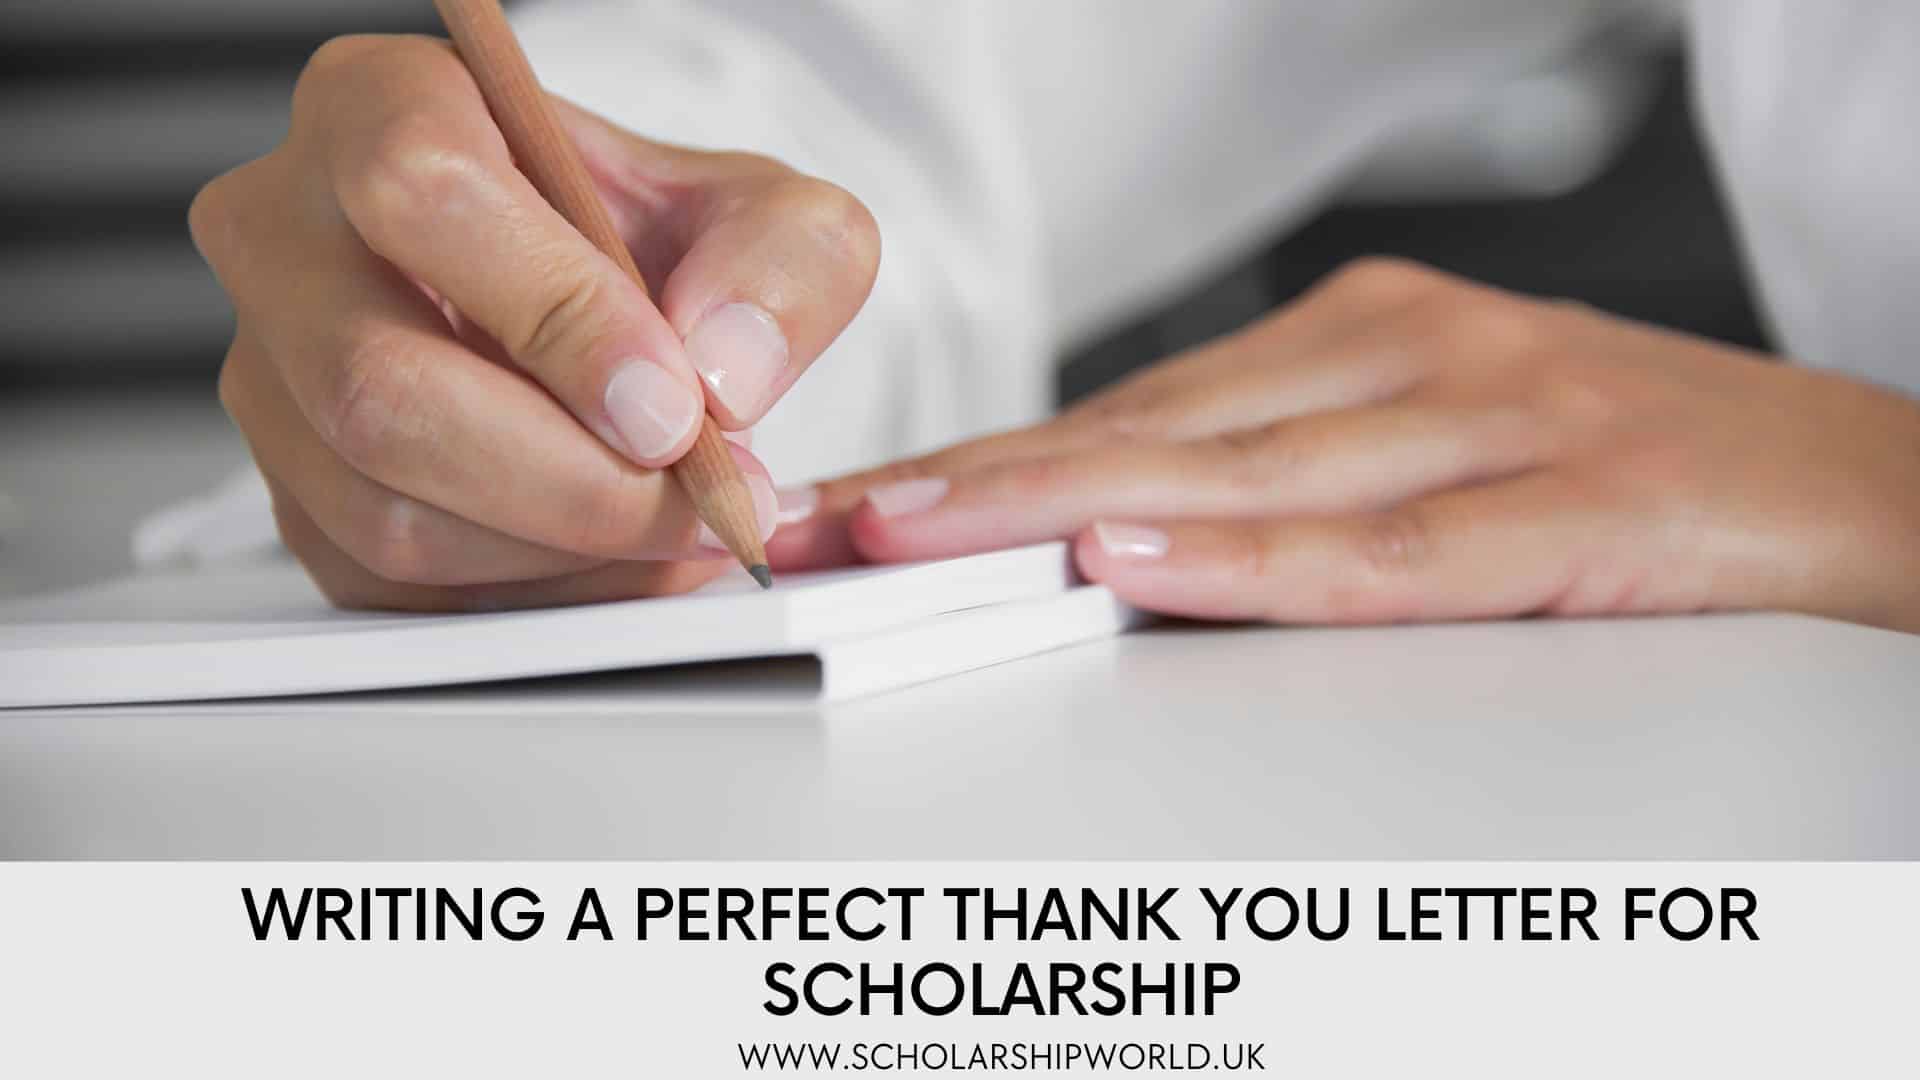 Writing A Perfect Thank You Letter For Scholarship